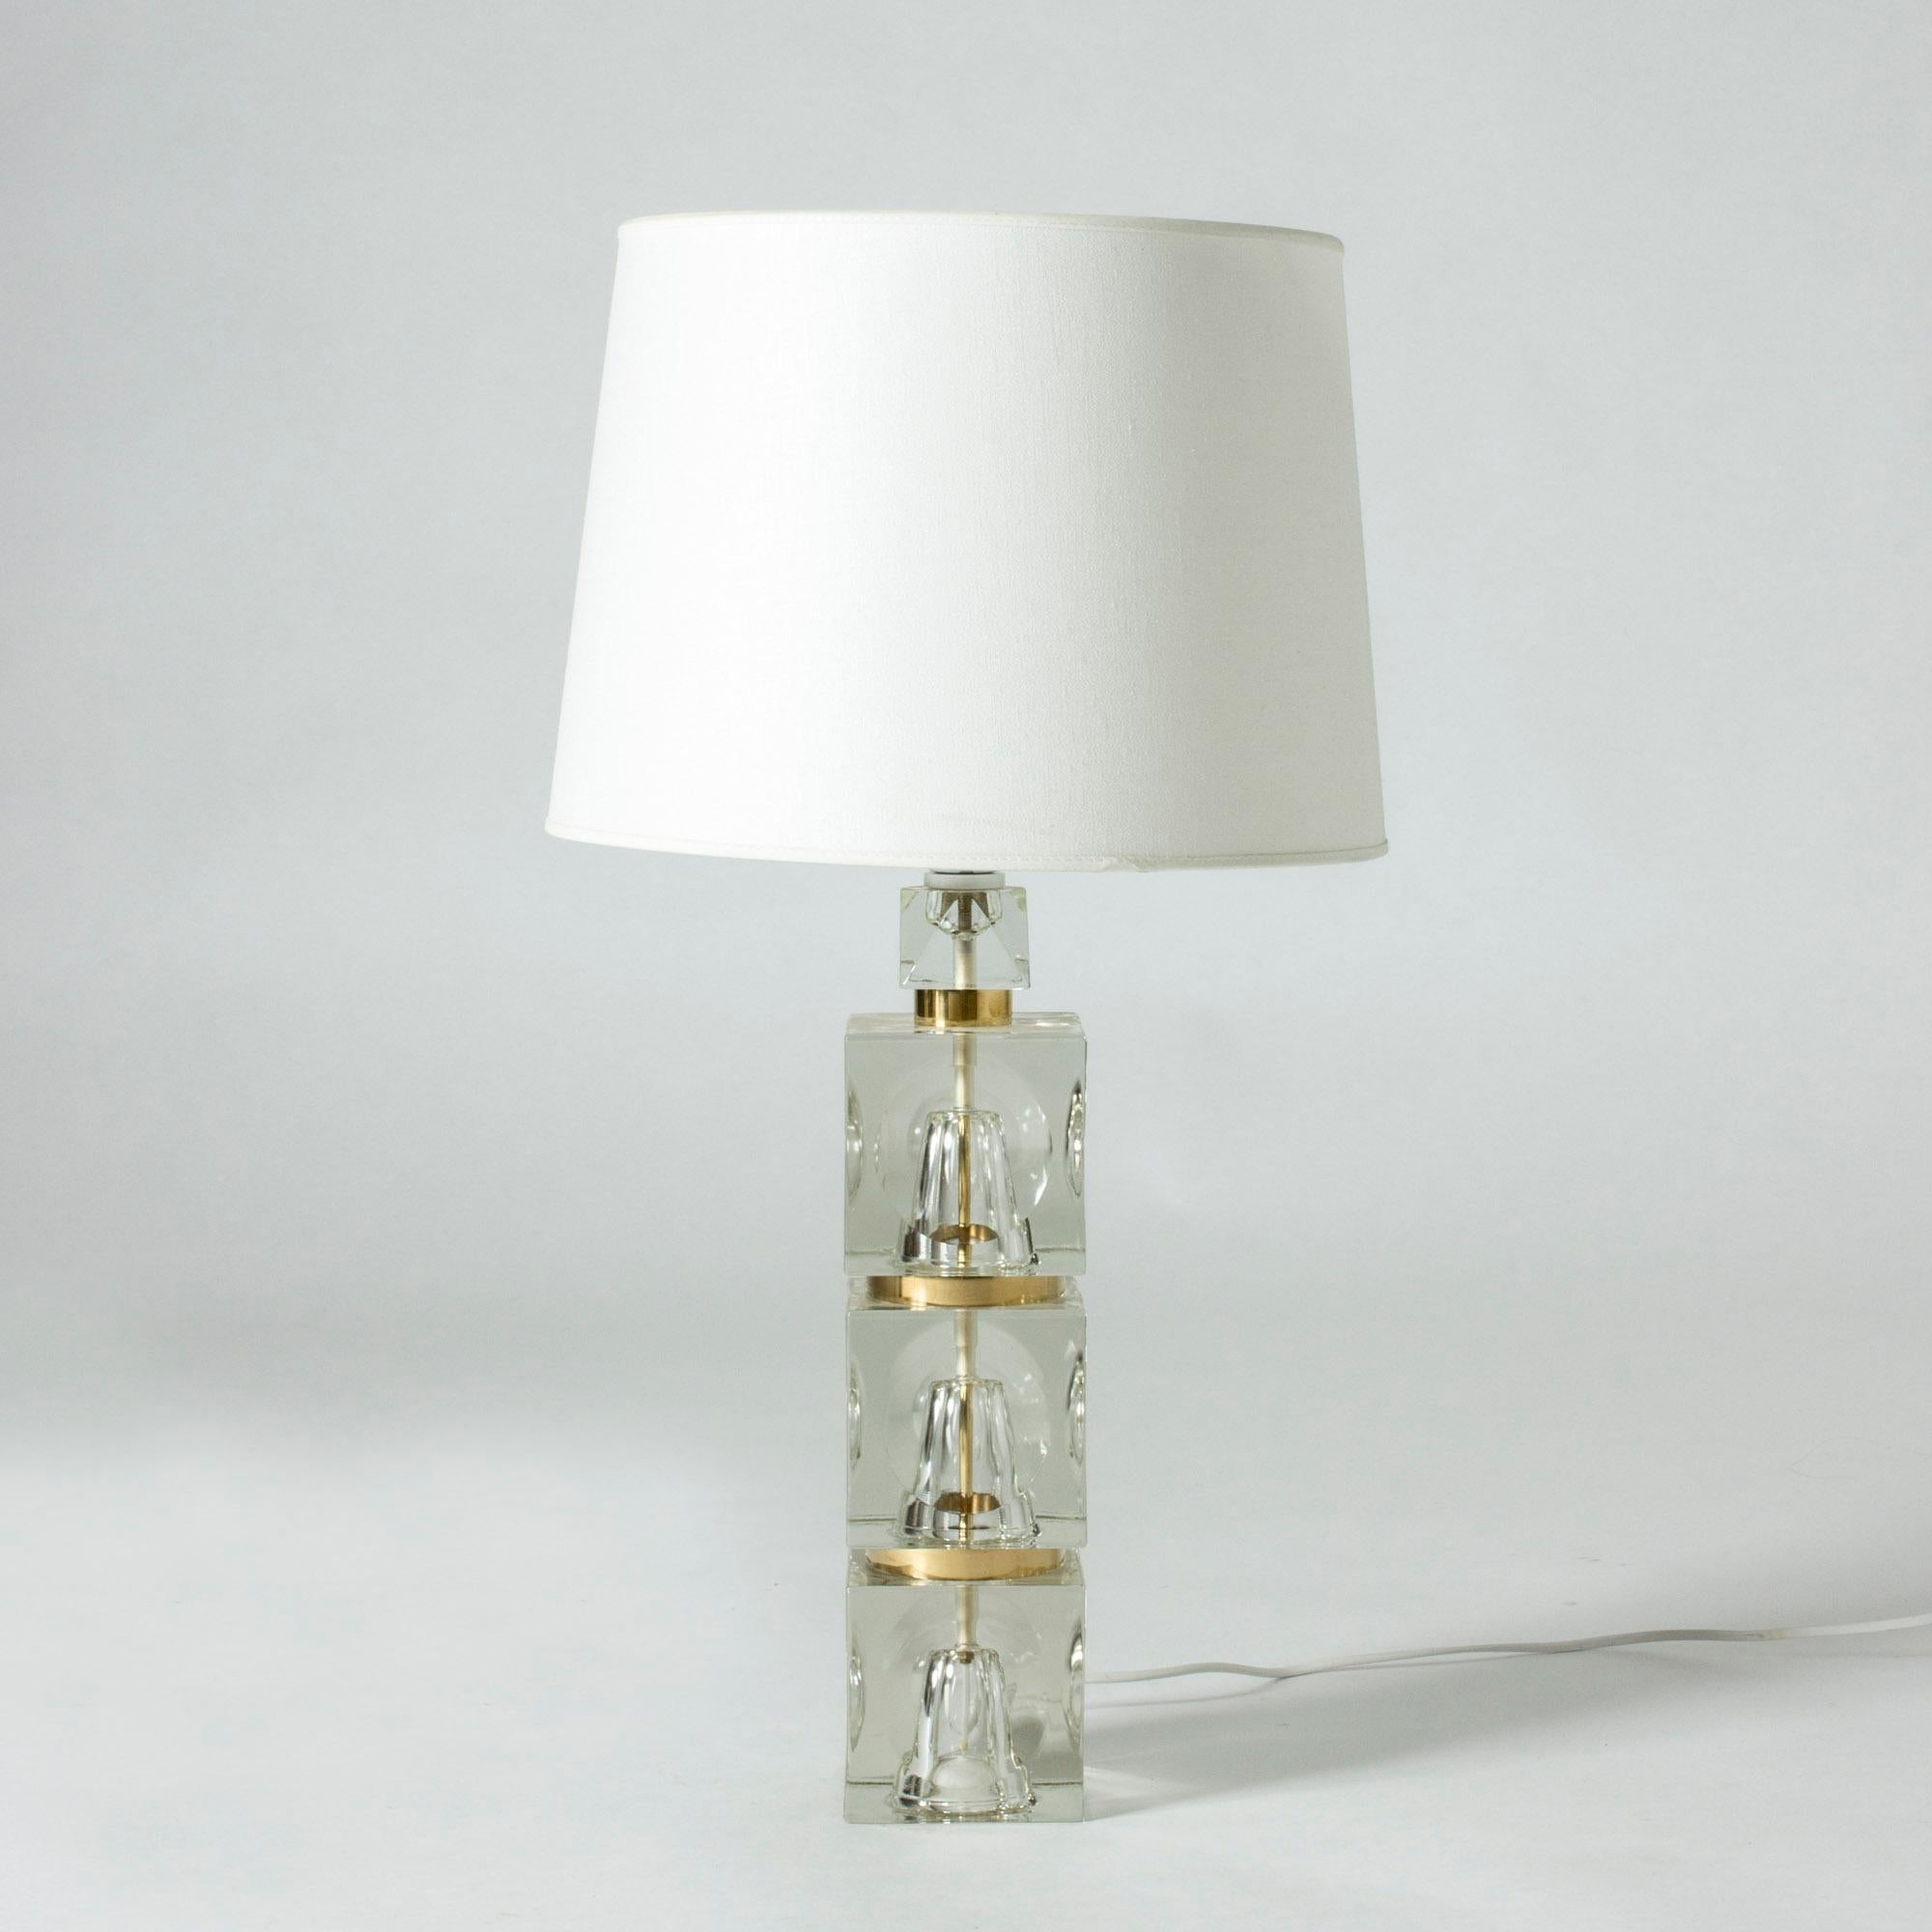 Cool Swedish 1960s crystal table lamp. Chunky base of stacked cubes with concave spherical cuts creating an interesting visual effect. The spaces between the cubes are painted gold.